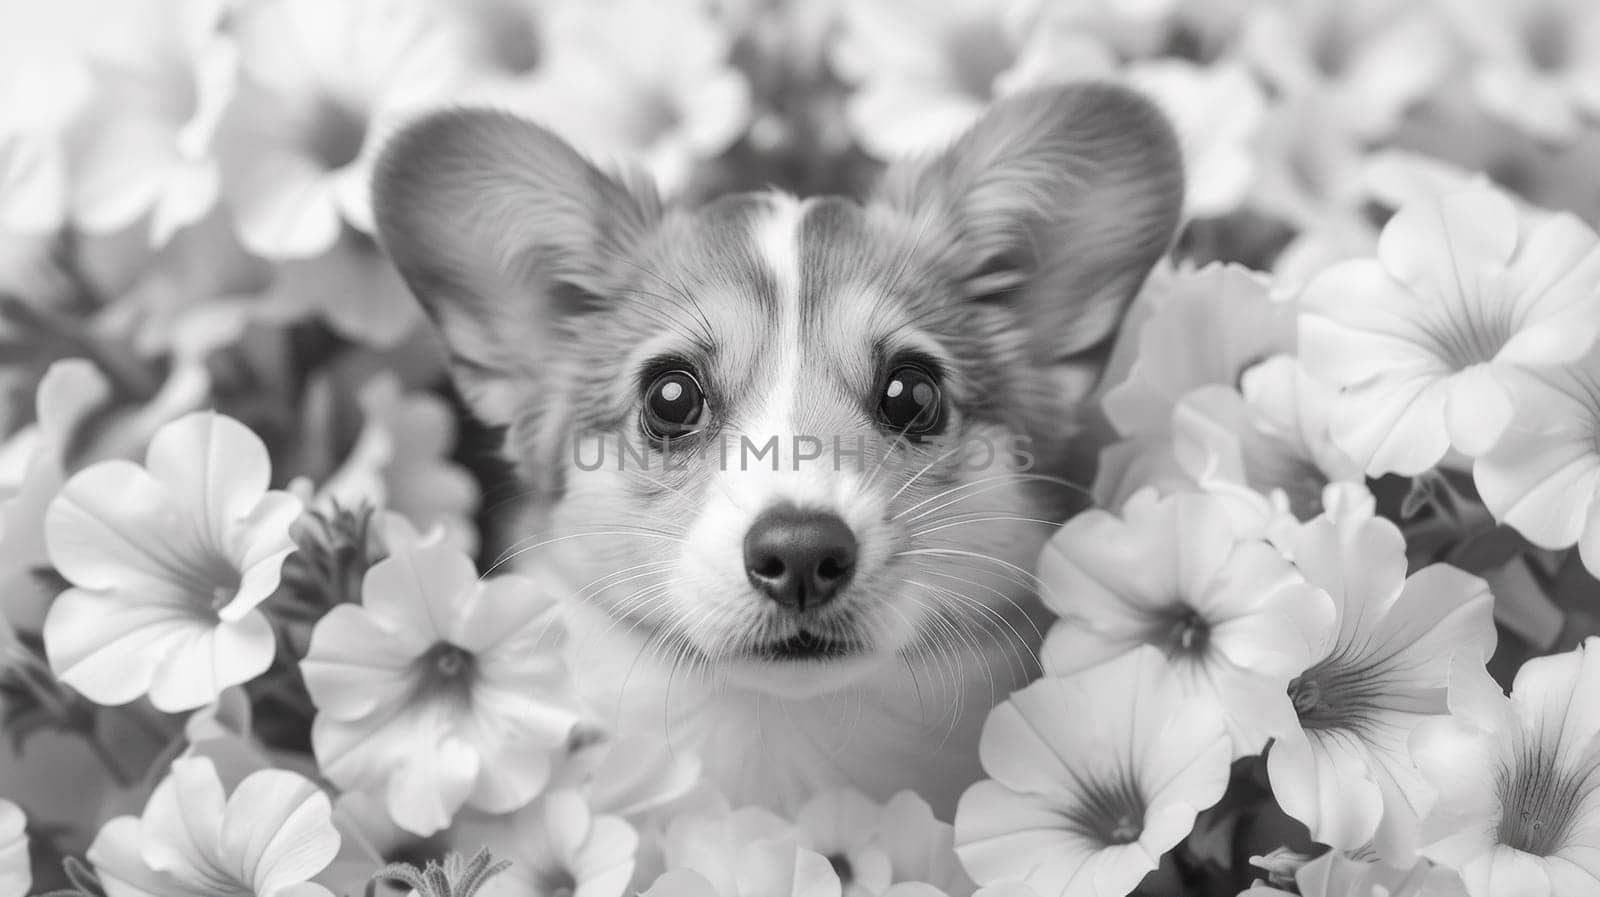 A black and white photo of a dog in the middle of flowers